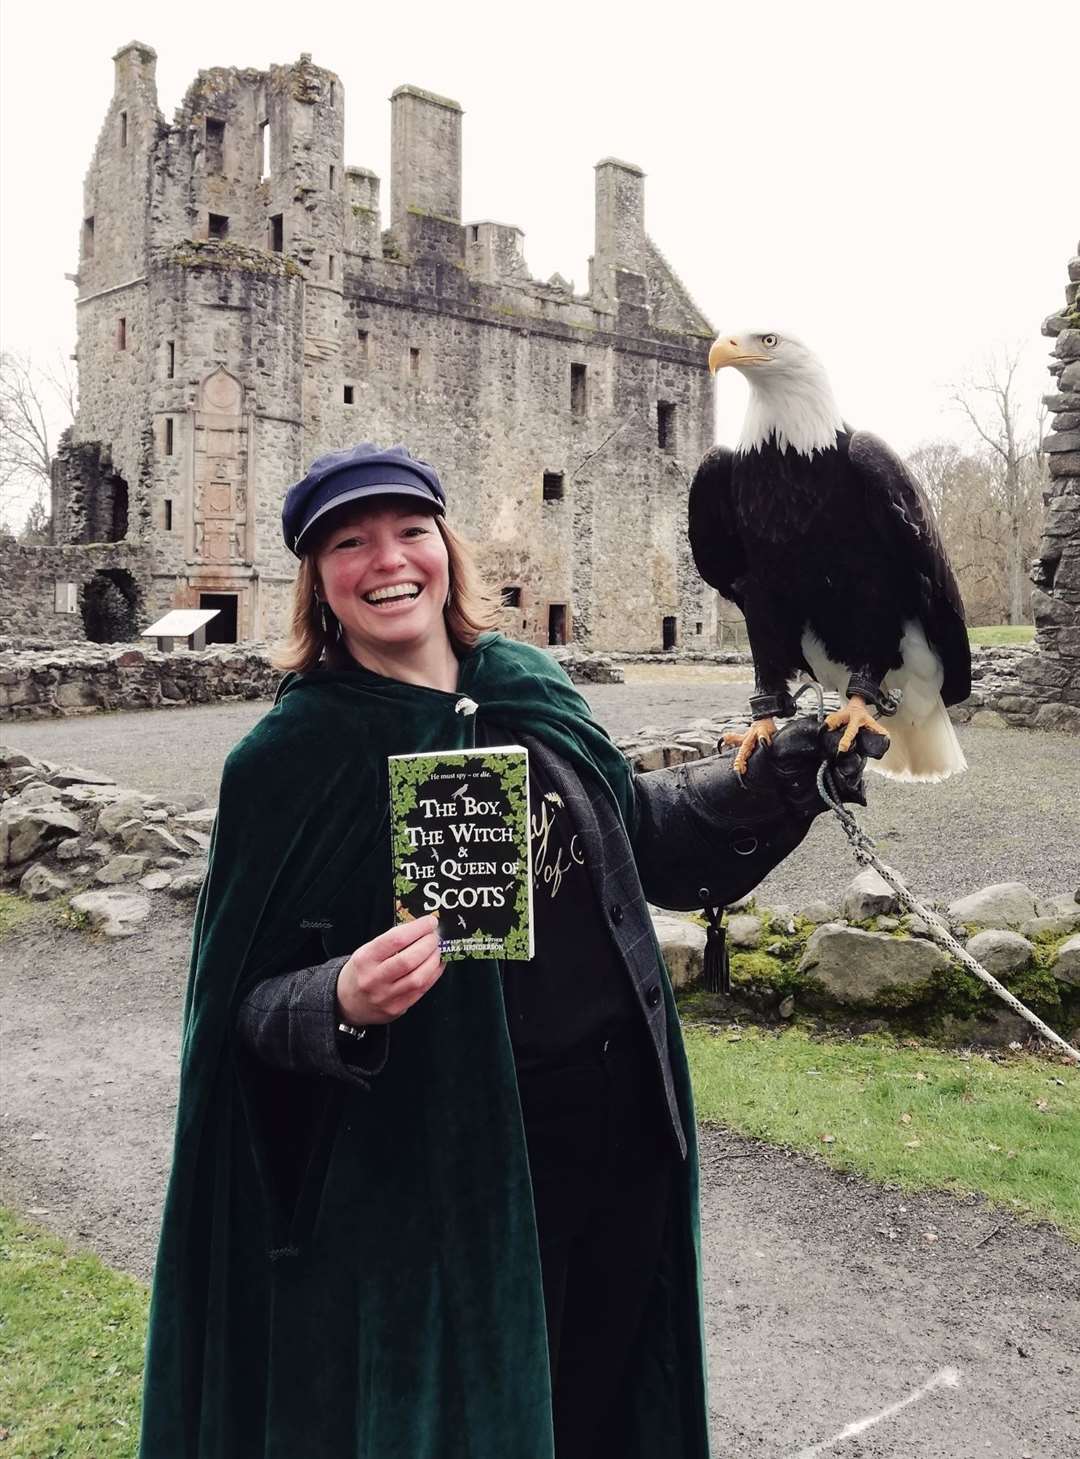 Barbara's novel features falconry throughout.